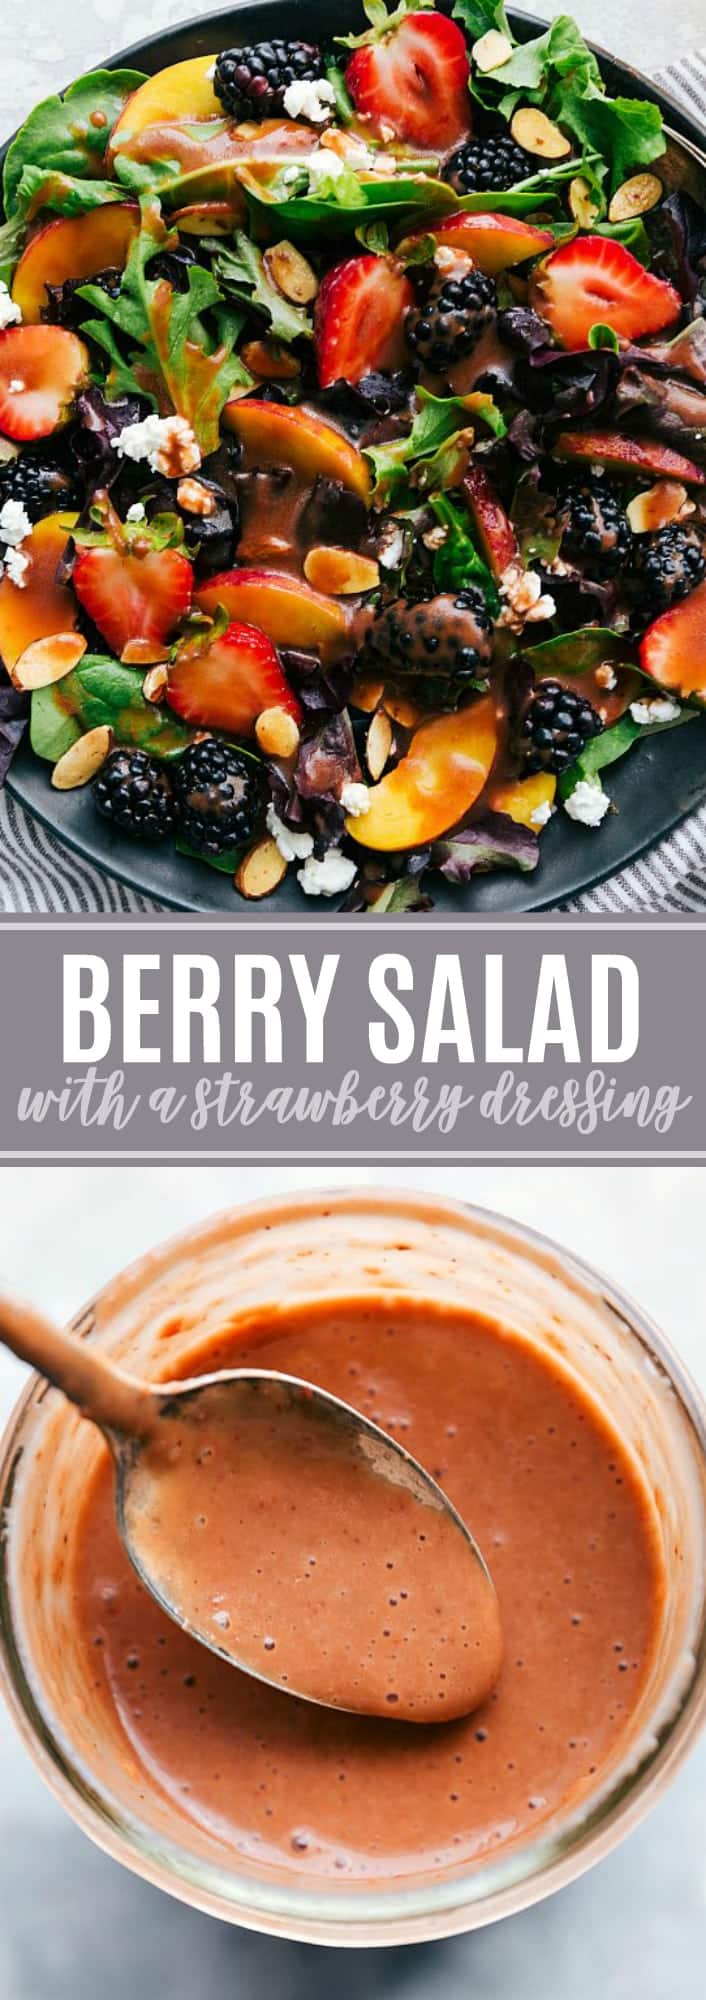 Fresh and flavor packed salad with an incredible strawberry balsamic vinaigrette via chelseasmessyapron.com #strawberry #salad #balsamic #dressing #vinaigrette #easy #quick #healthy #feta #goat #cheese #almonds #best #potluck #peach #peaches #blackberry